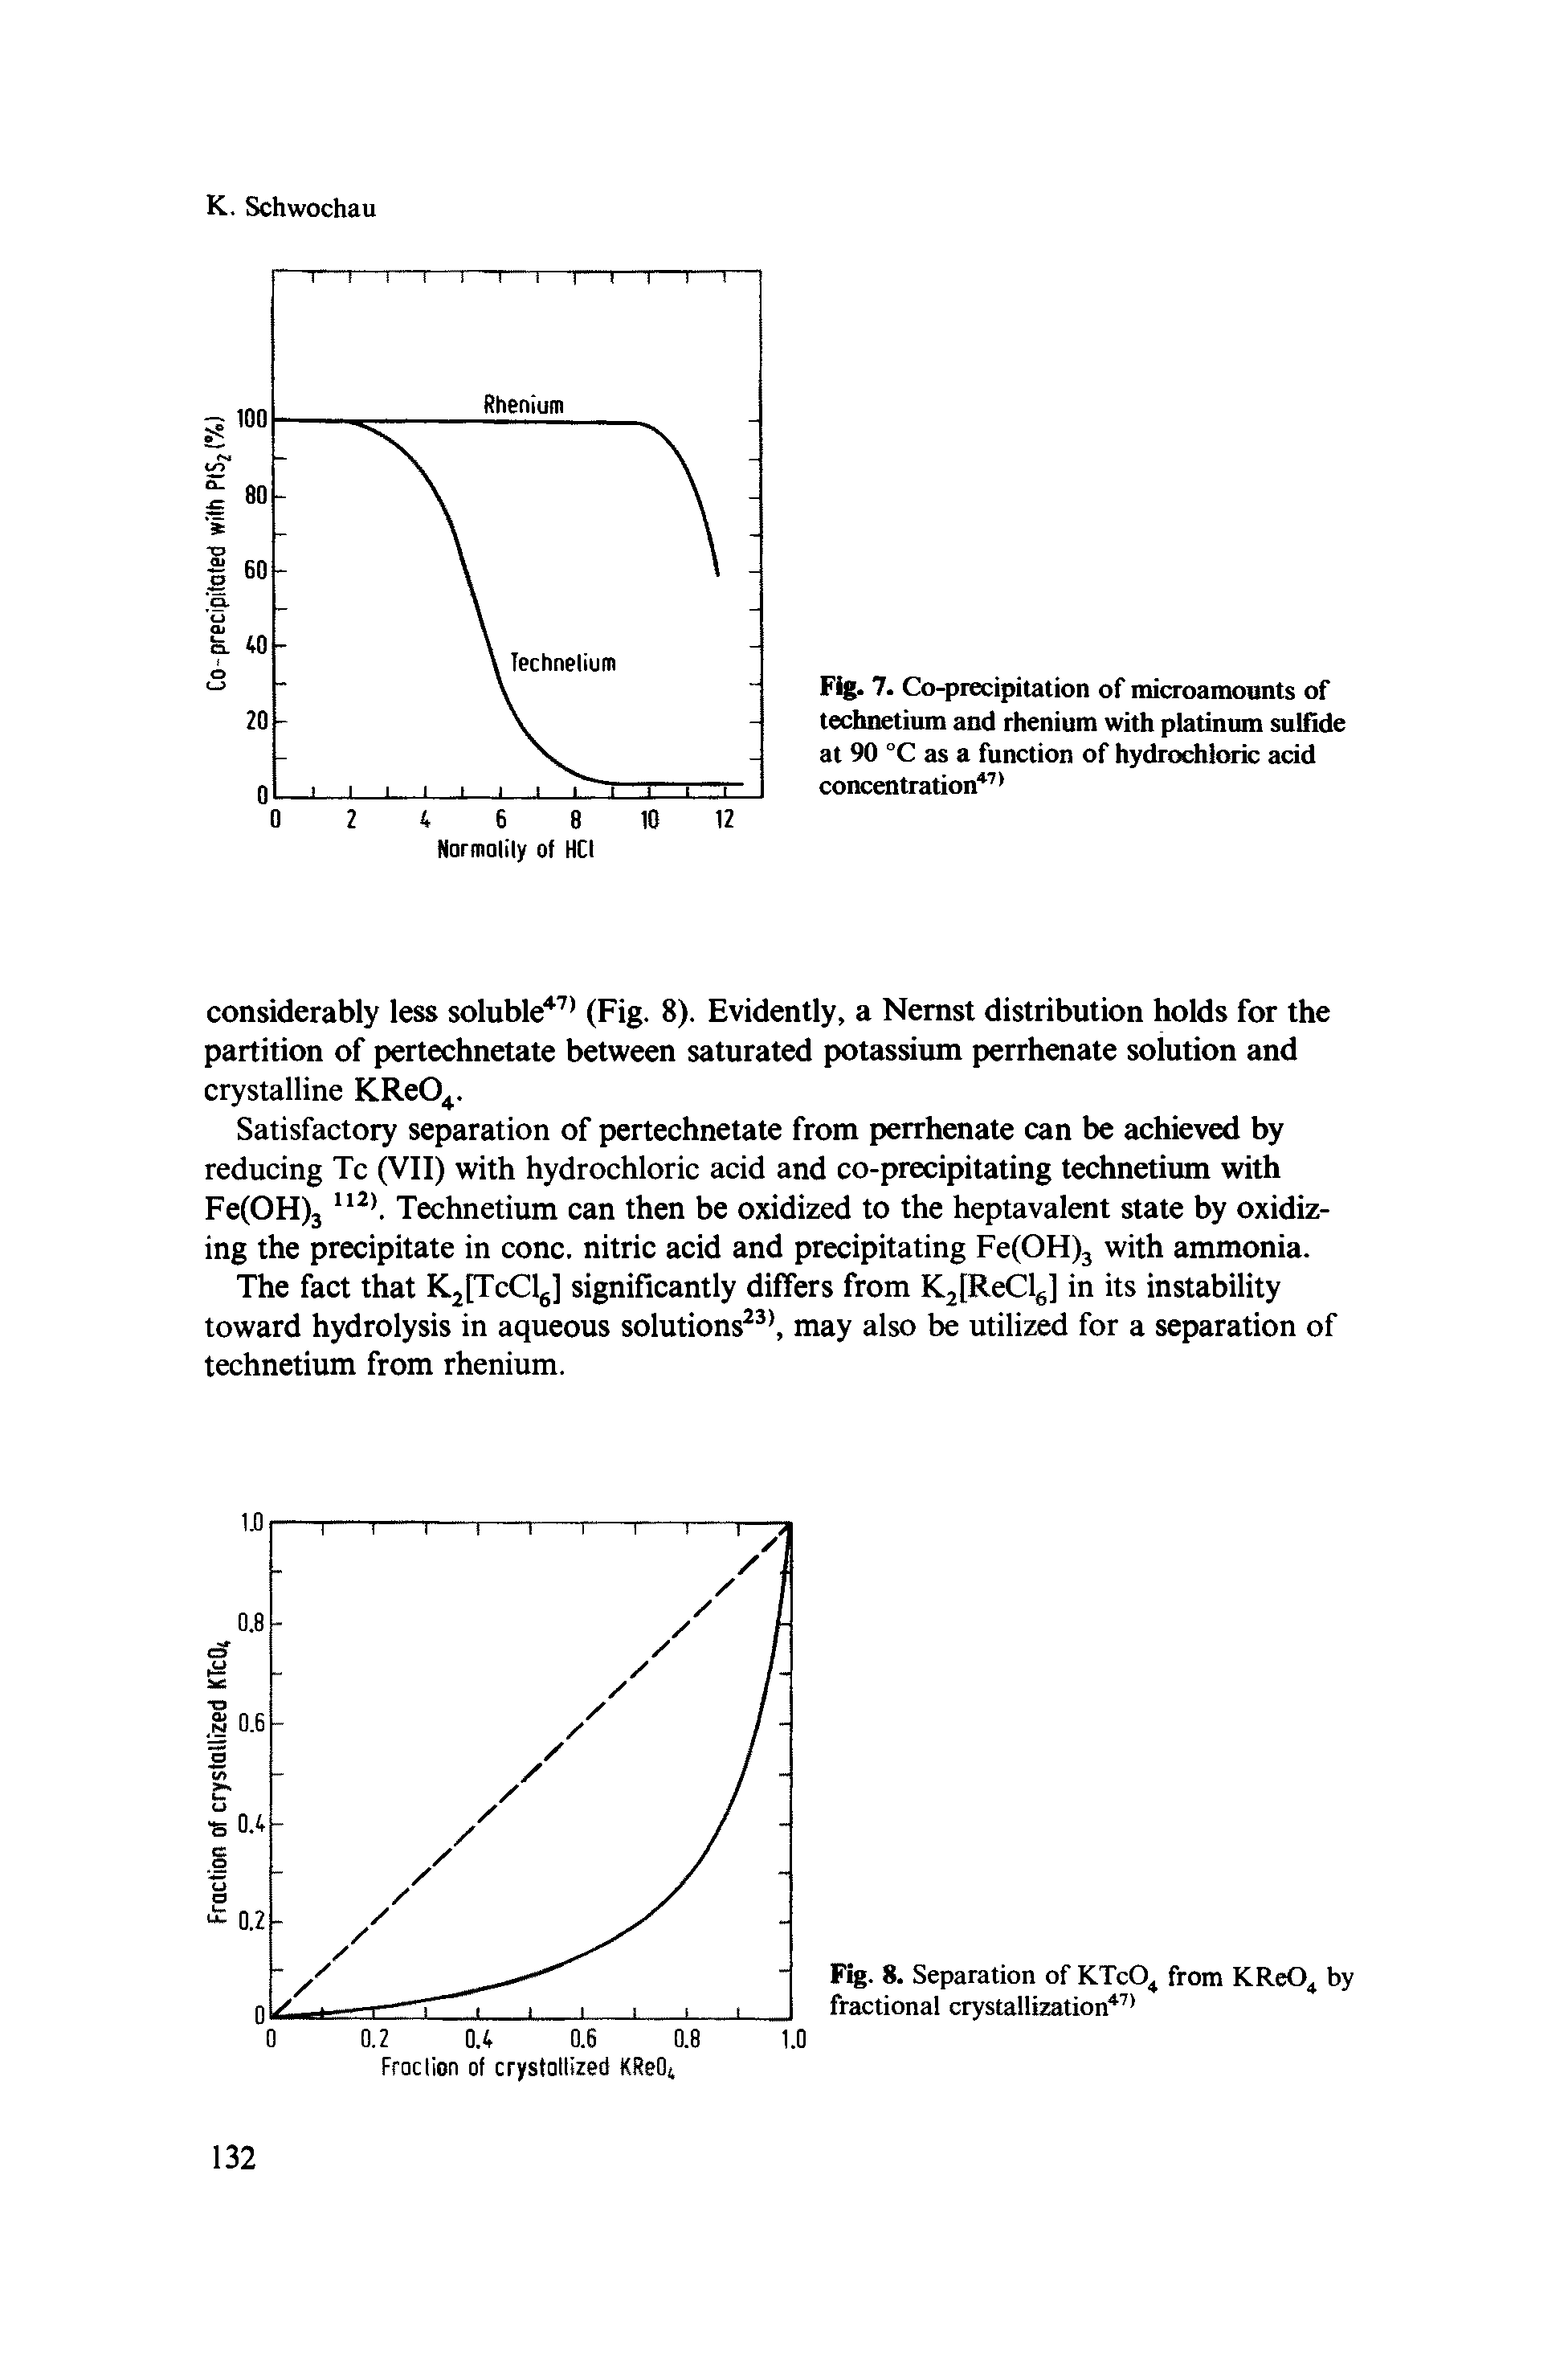 Fig. 7. Co-precipitation of microamounts of technetium and rhenium with platinum sulfide at 90 °C as a function of hydrochloric acid concentration ...